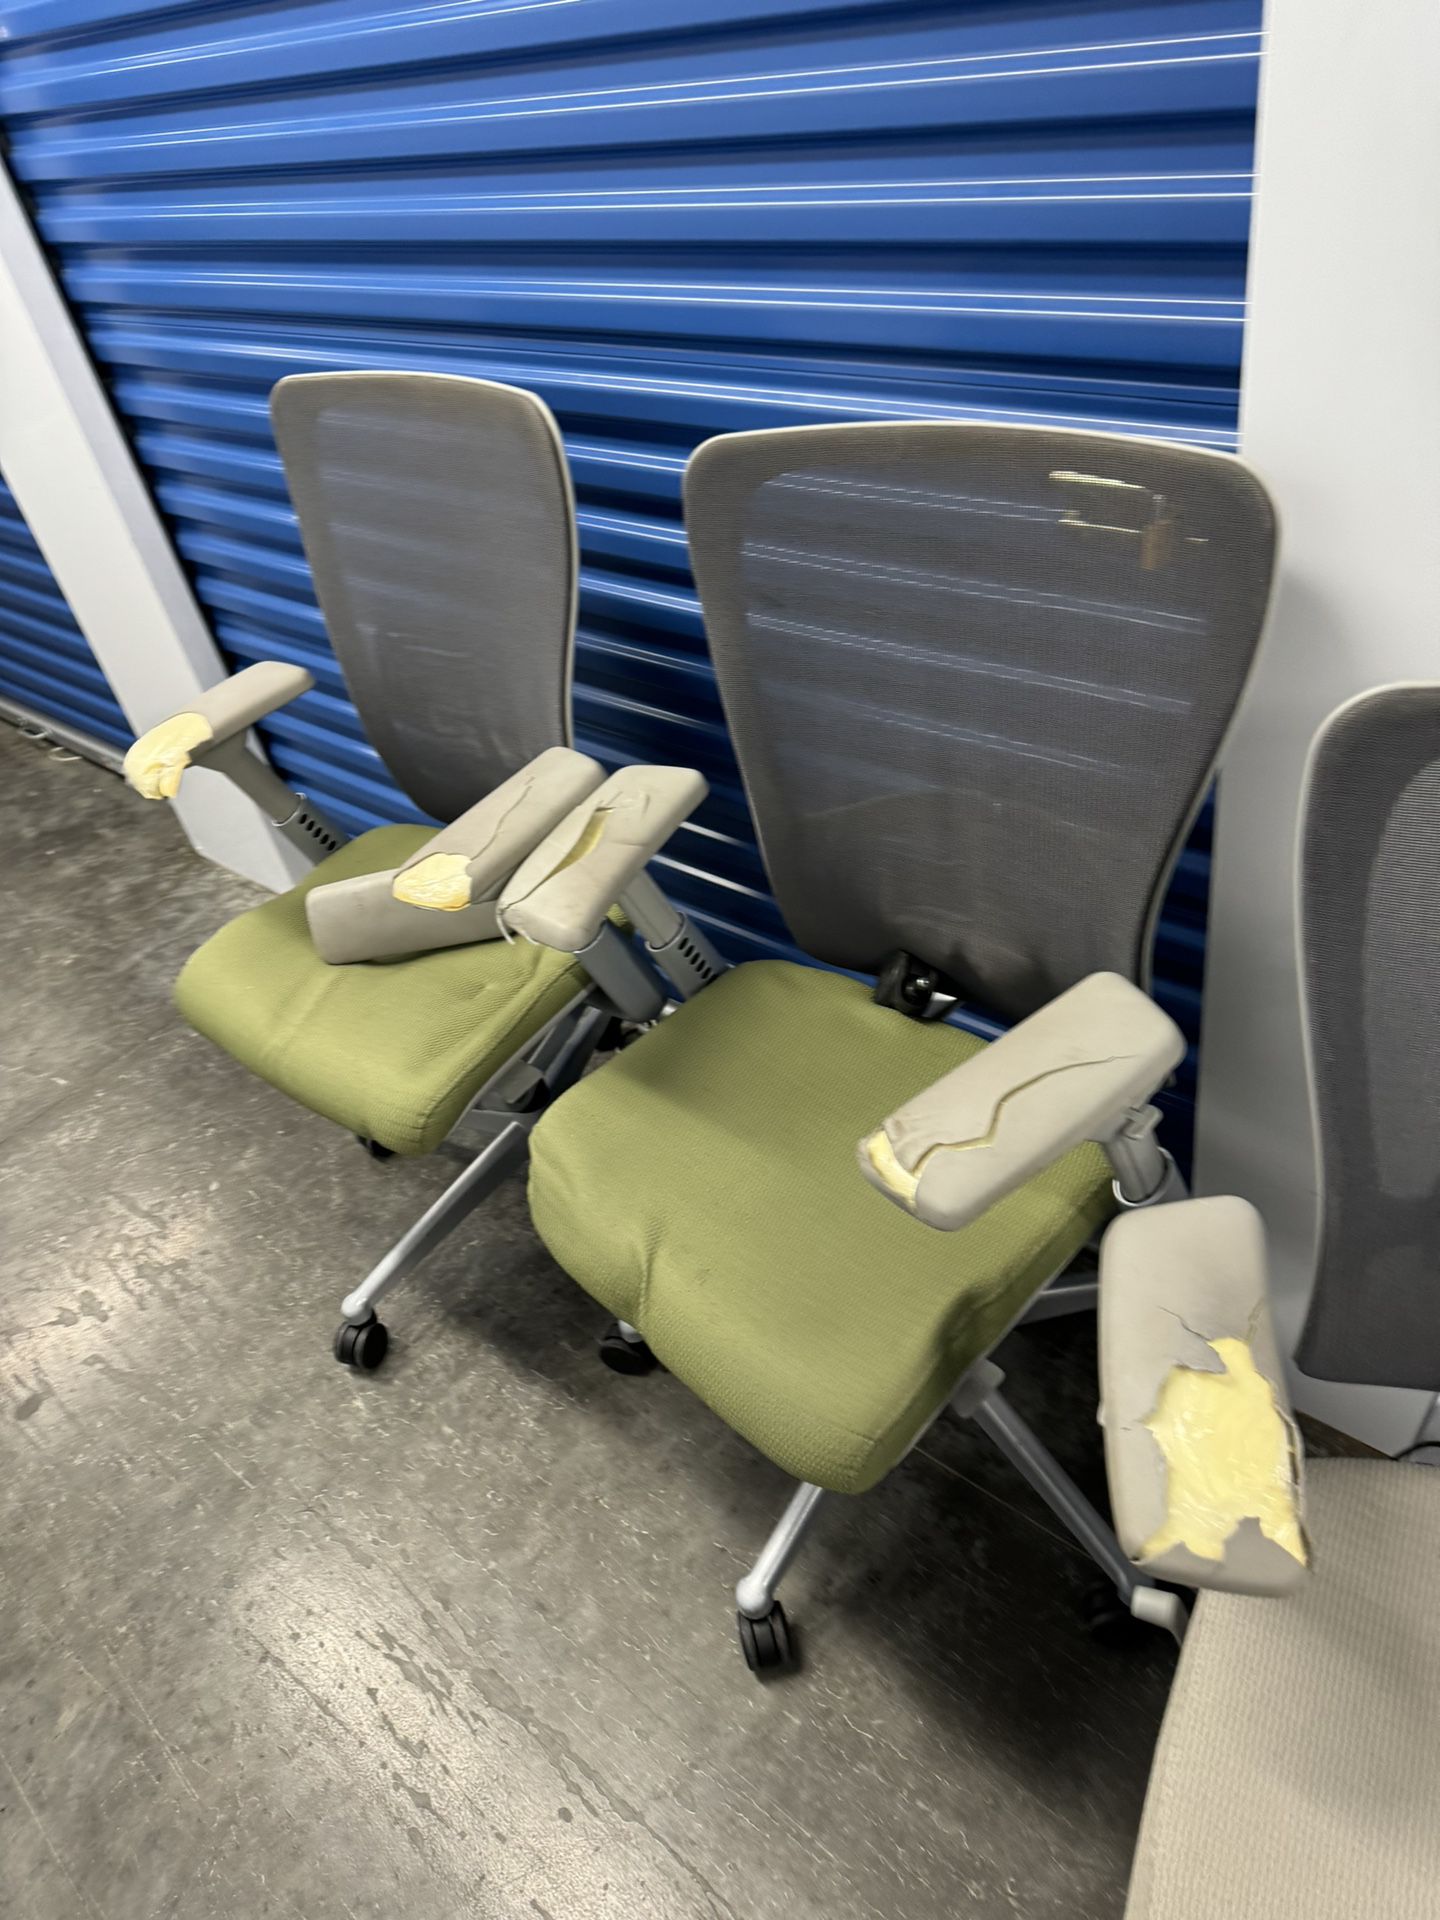 Zody Dual Posture Mesh Office Chair Sold Separately $30-$50each Or $300 for All